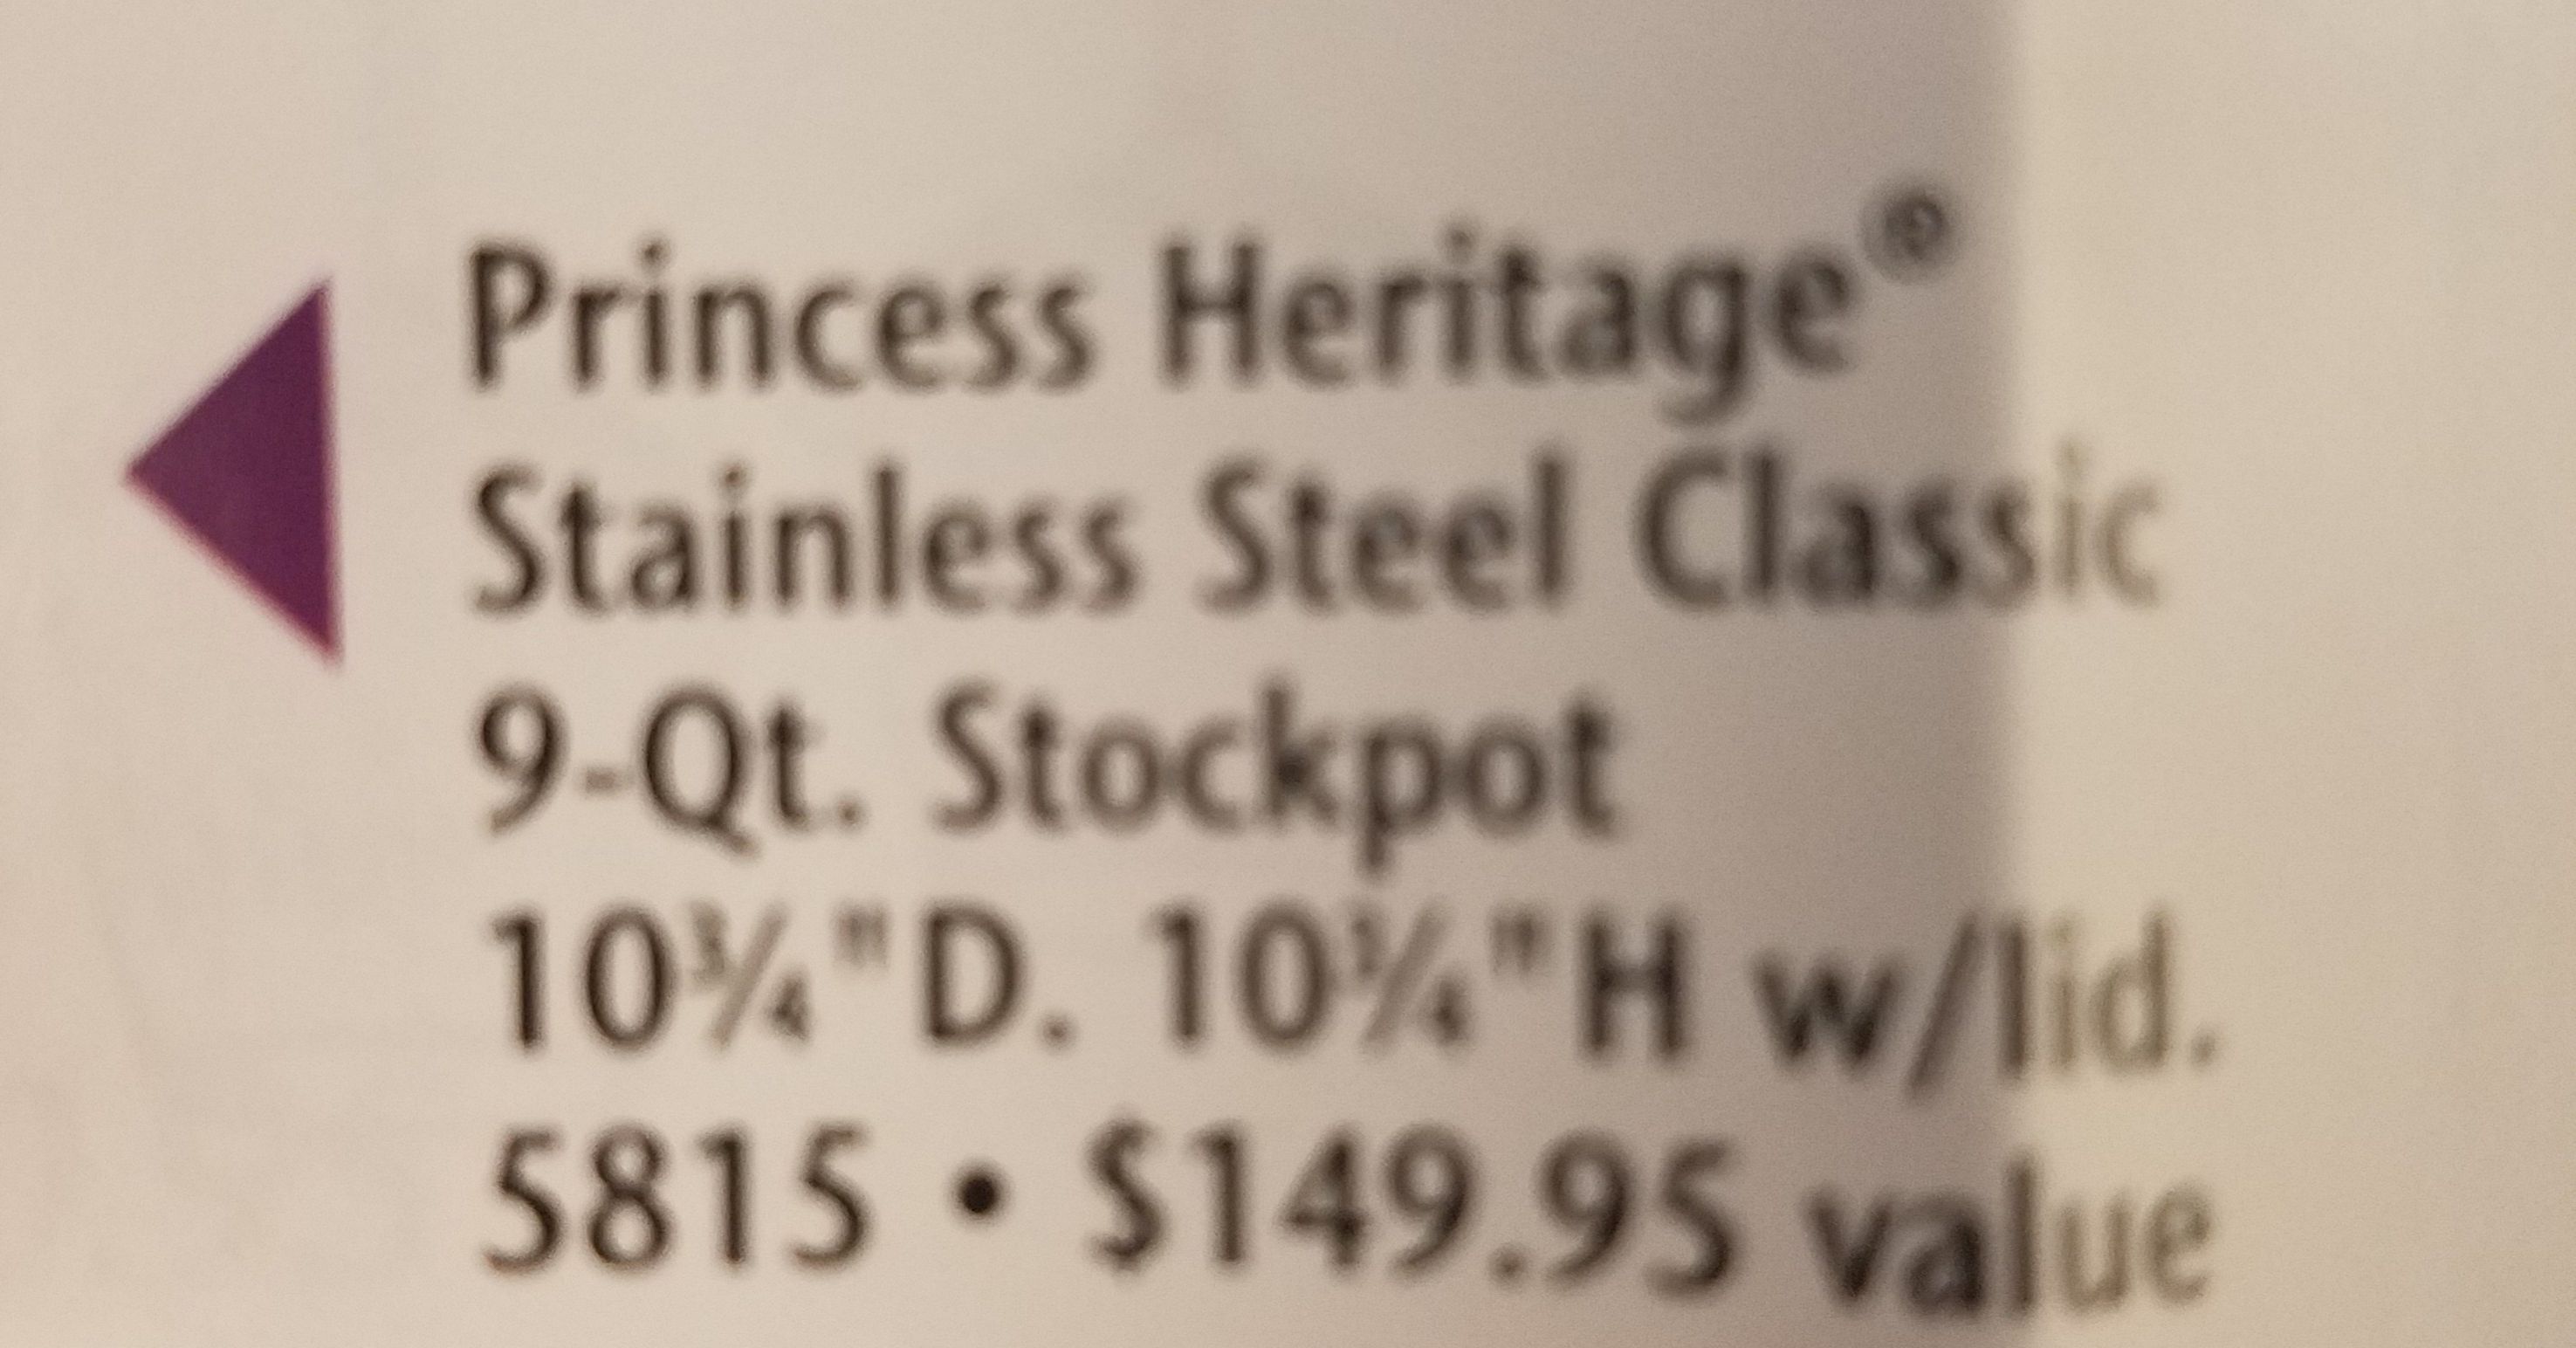 Princess House Heritage Stainless Steel 9-Qt. Stockpot (5815 ) New In Box